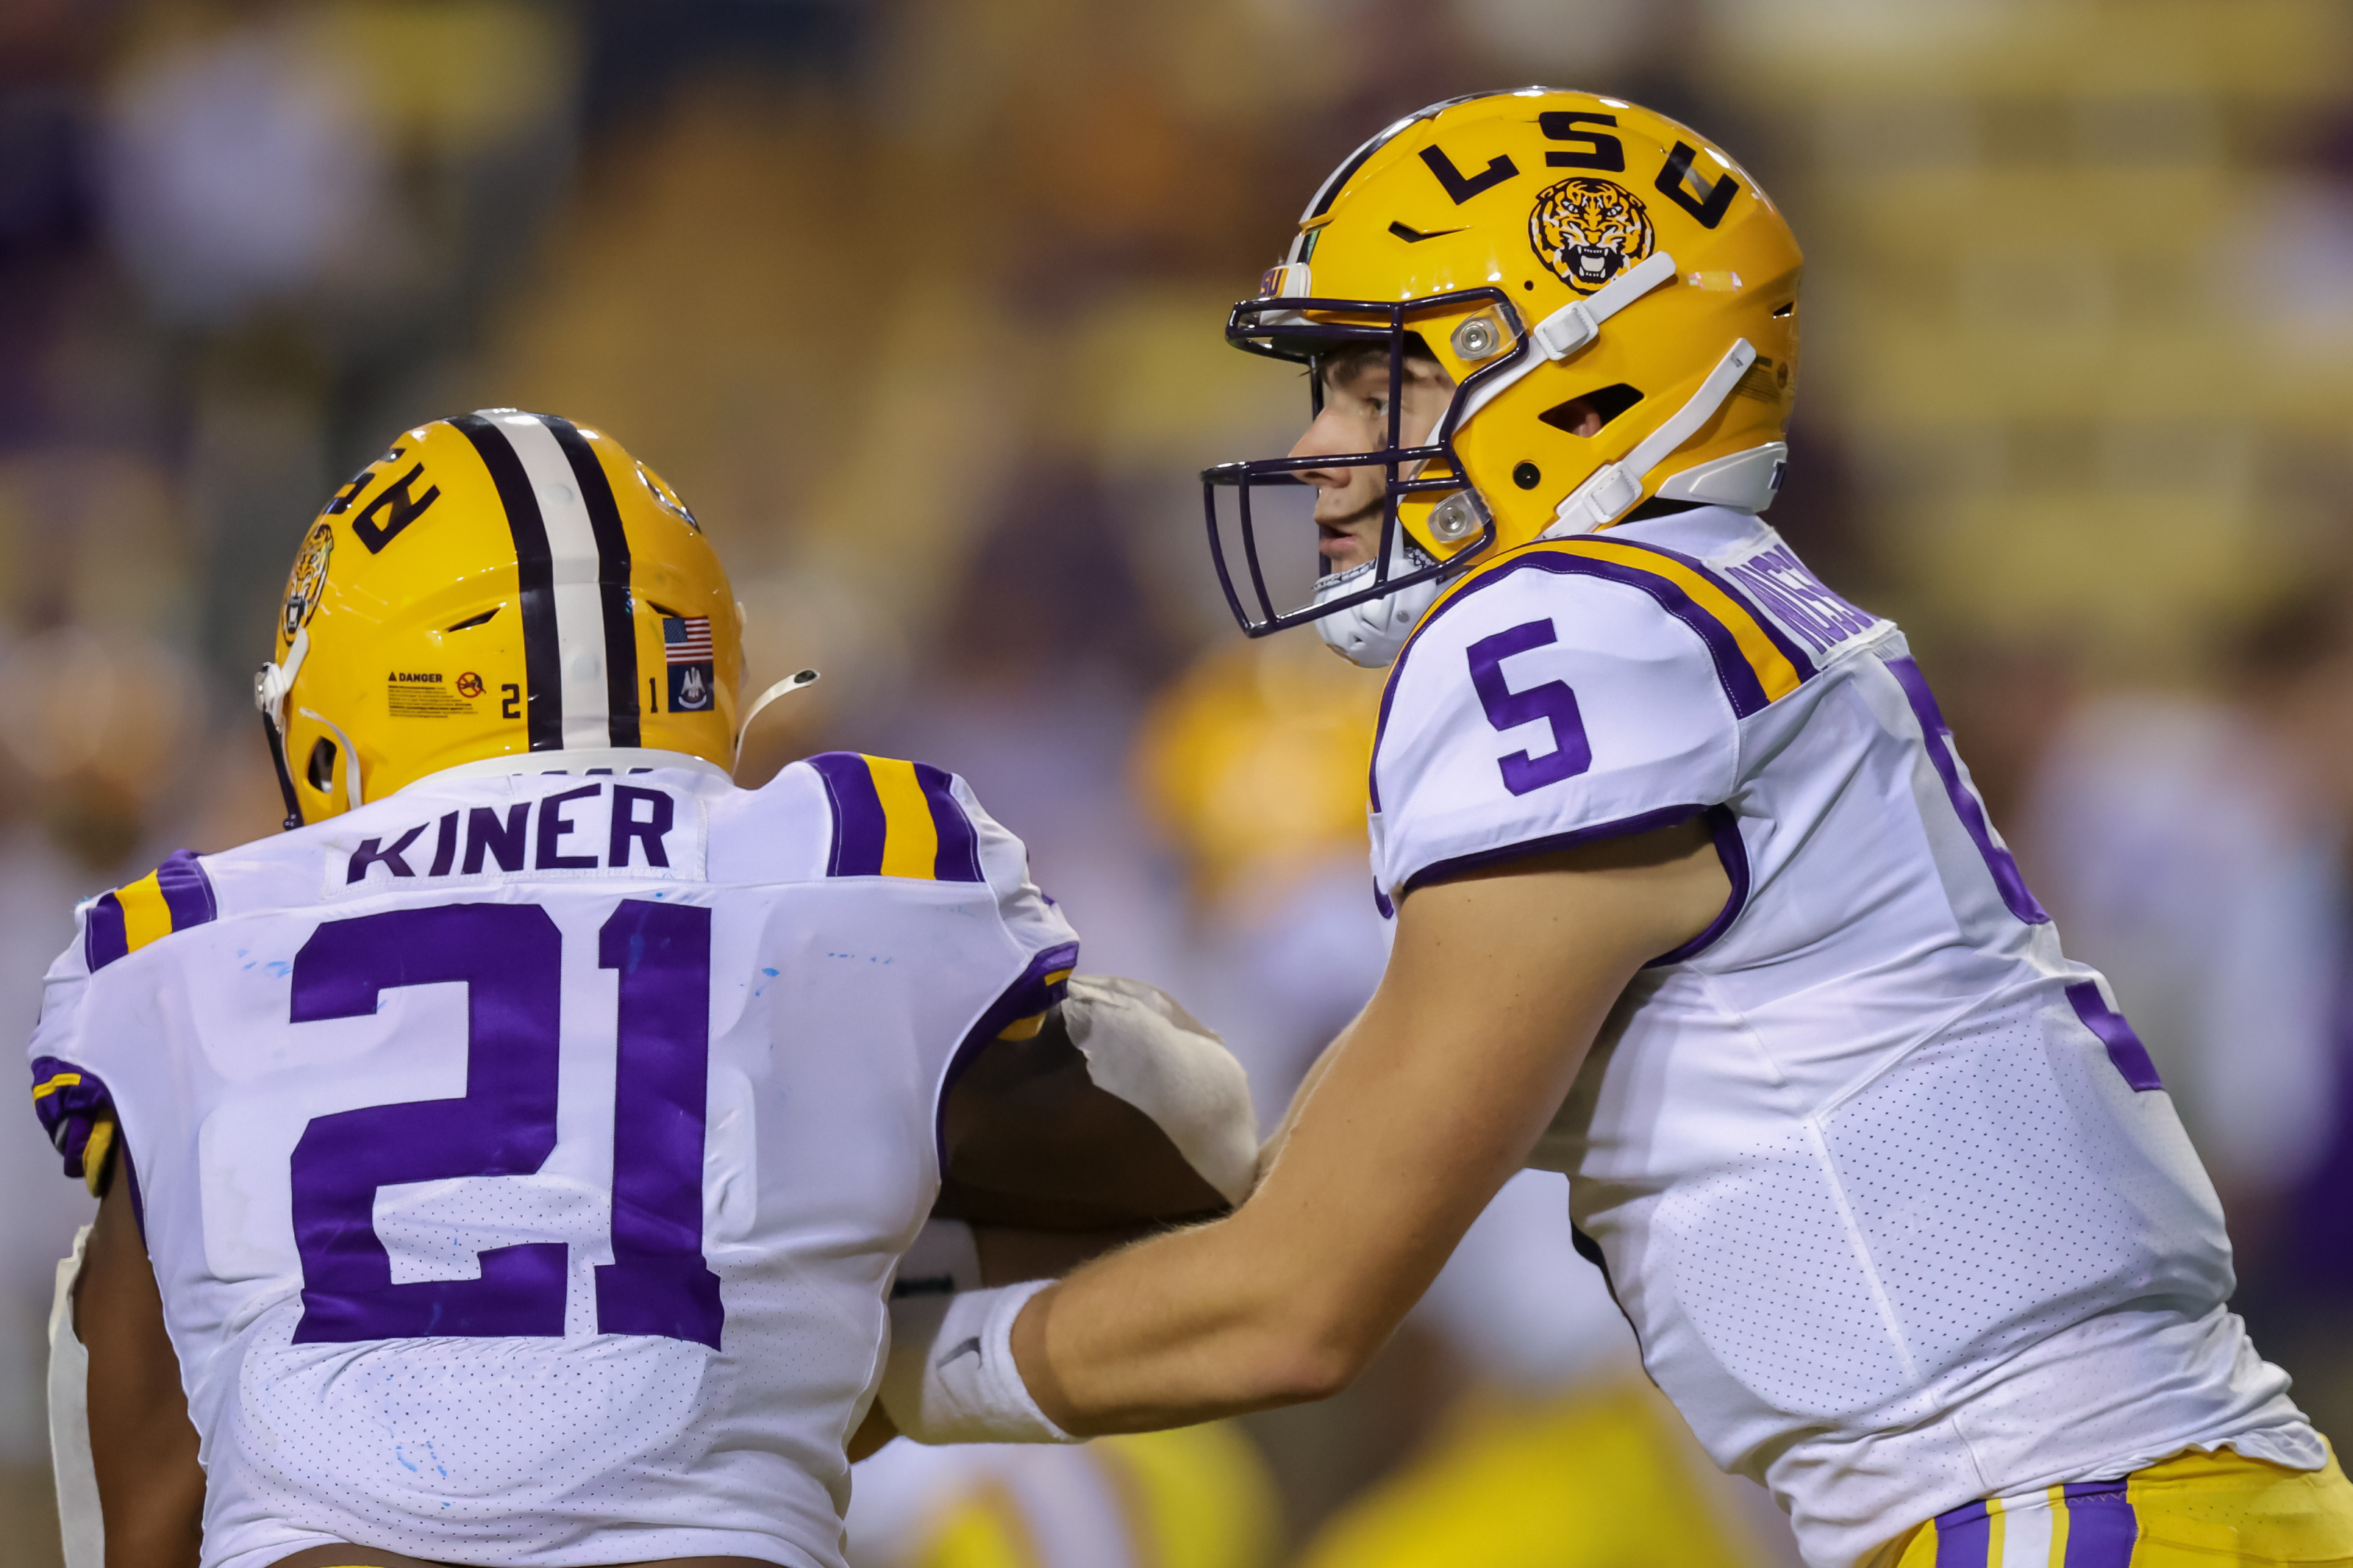 LSU Game Today LSU vs Central Michigan injury report, schedule, live Stream, TV channel and betting preview for Week 3 college football game